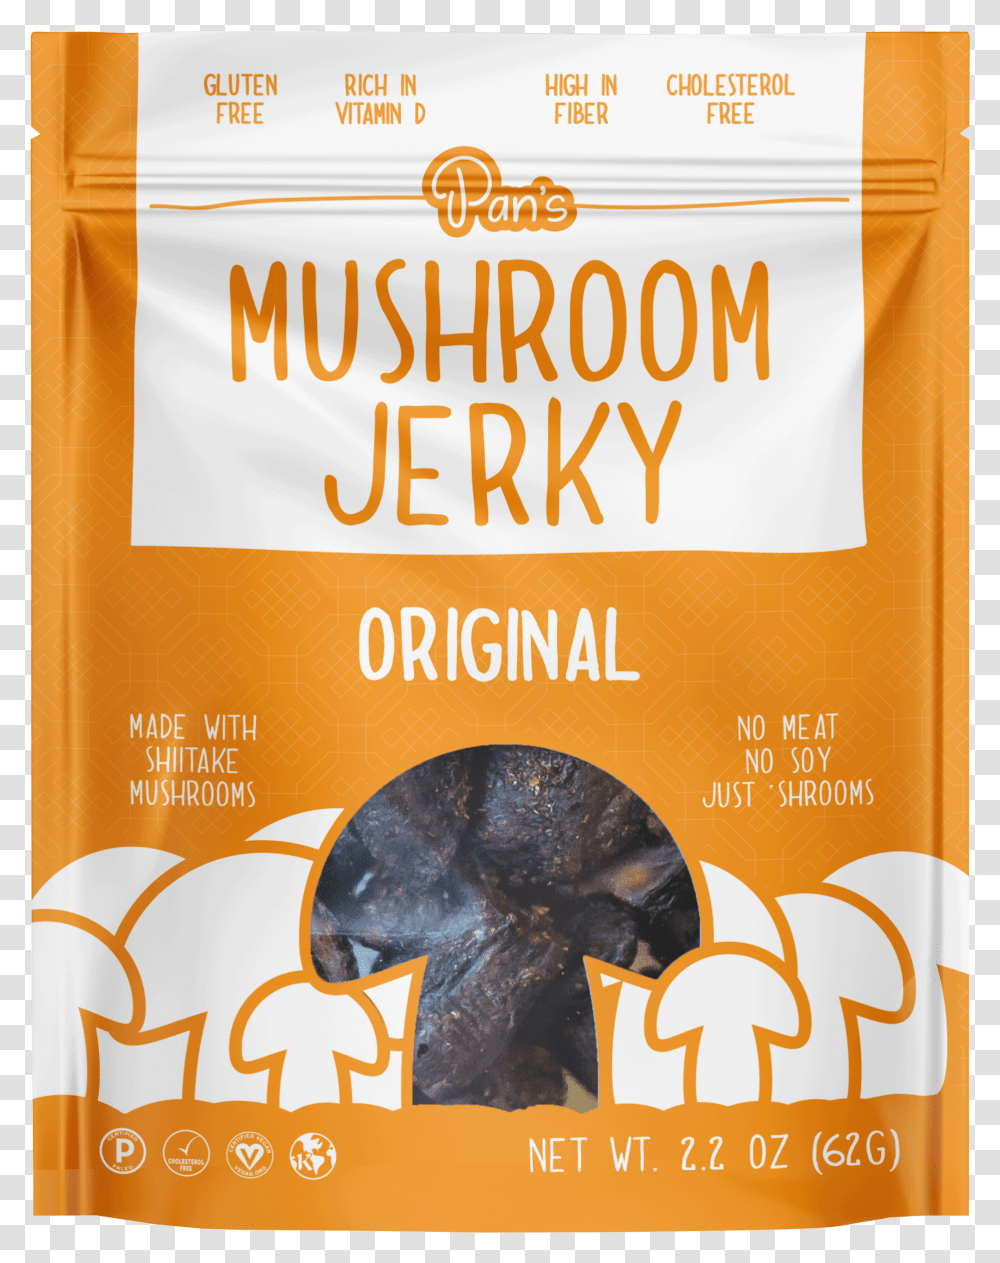 Class Lazyload Lazyload Mirage Cloudzoom Featured Image Pans Mushroom Jerky, Poster, Advertisement, Flyer, Paper Transparent Png